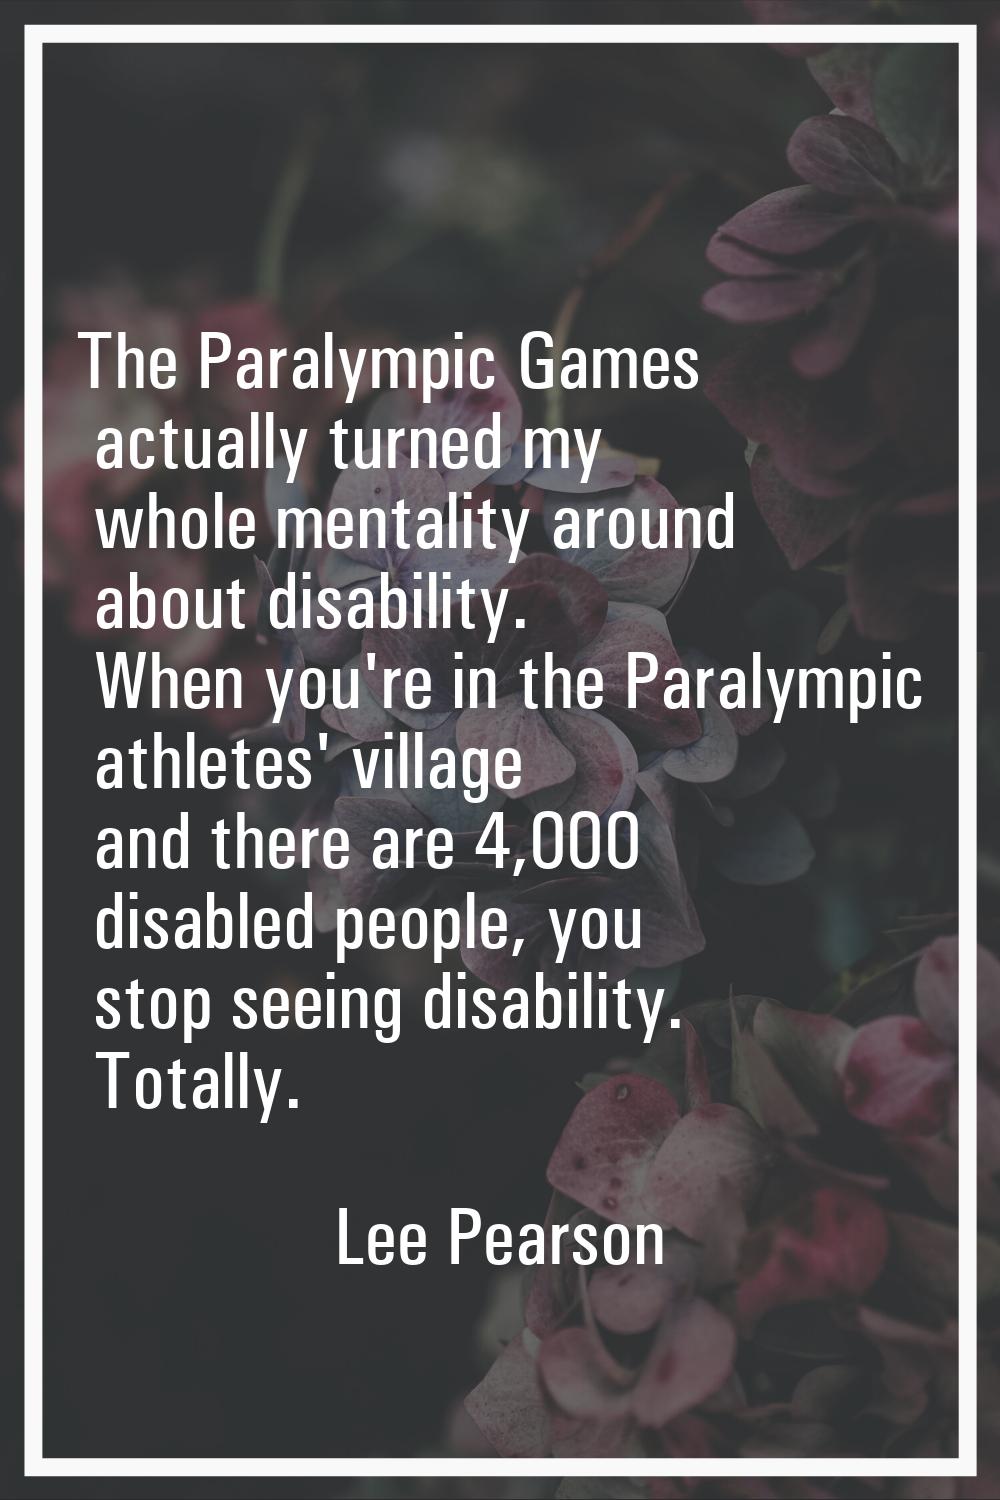 The Paralympic Games actually turned my whole mentality around about disability. When you're in the